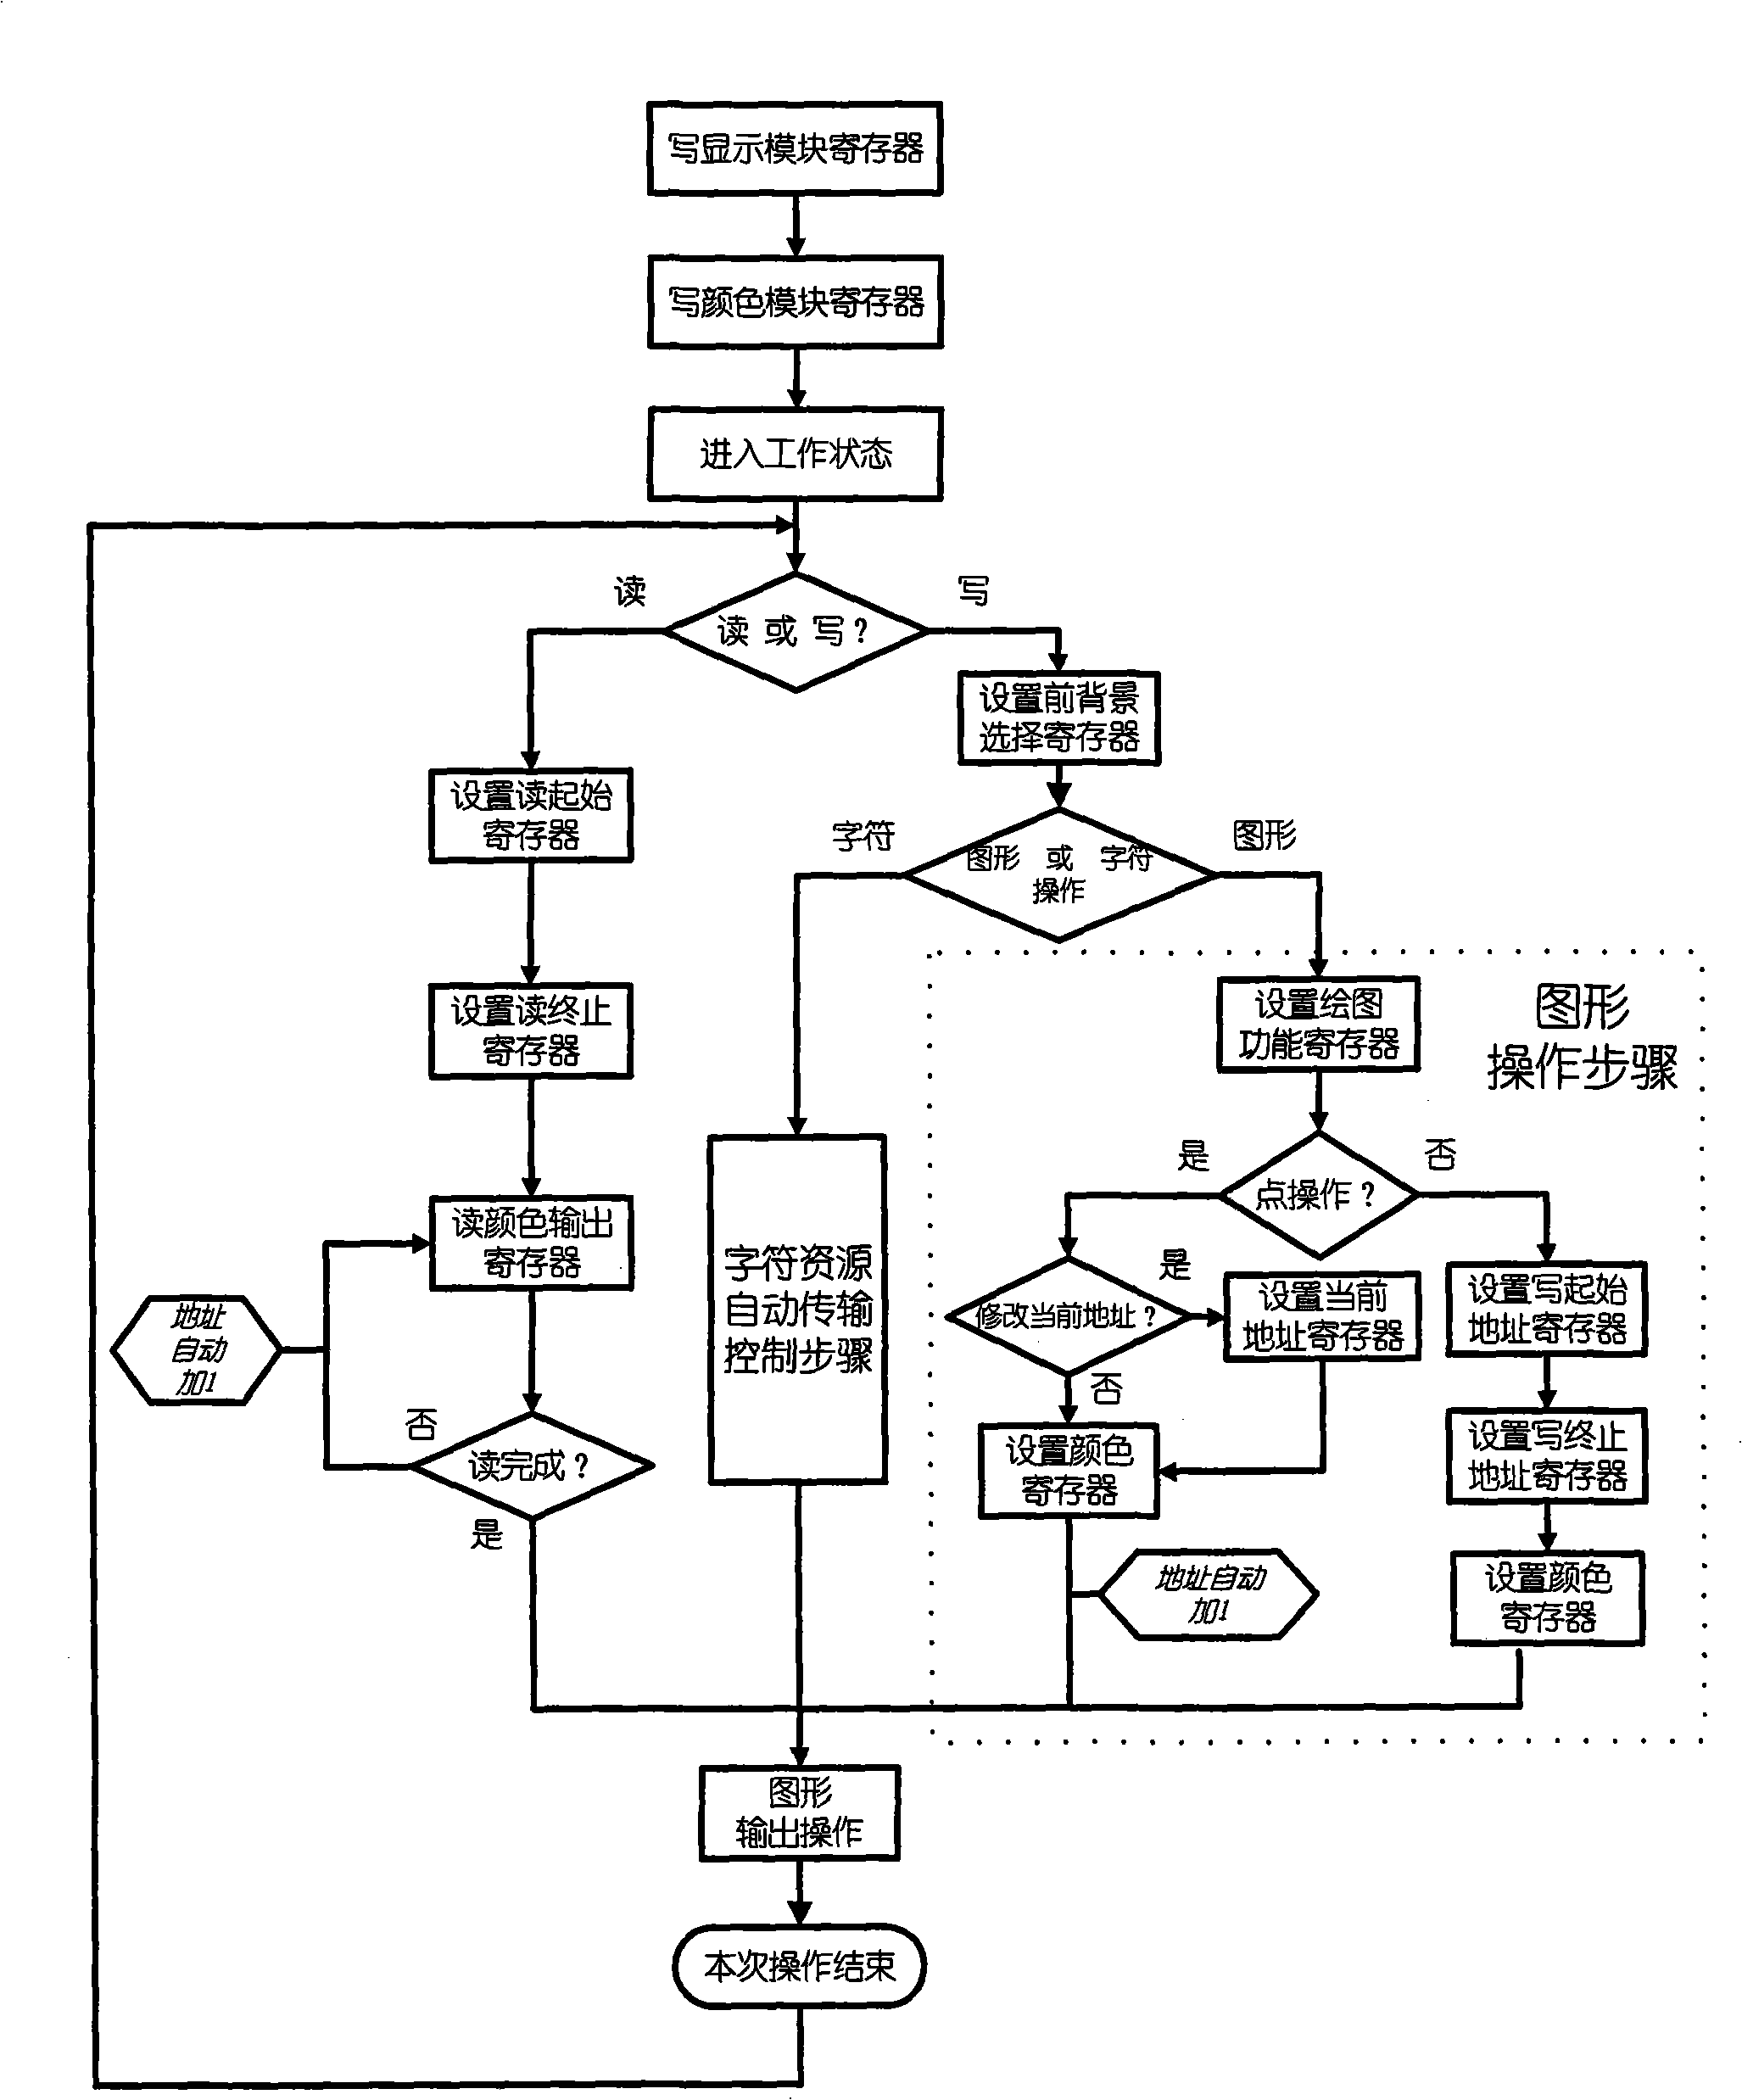 LCD graphical display controller and control method